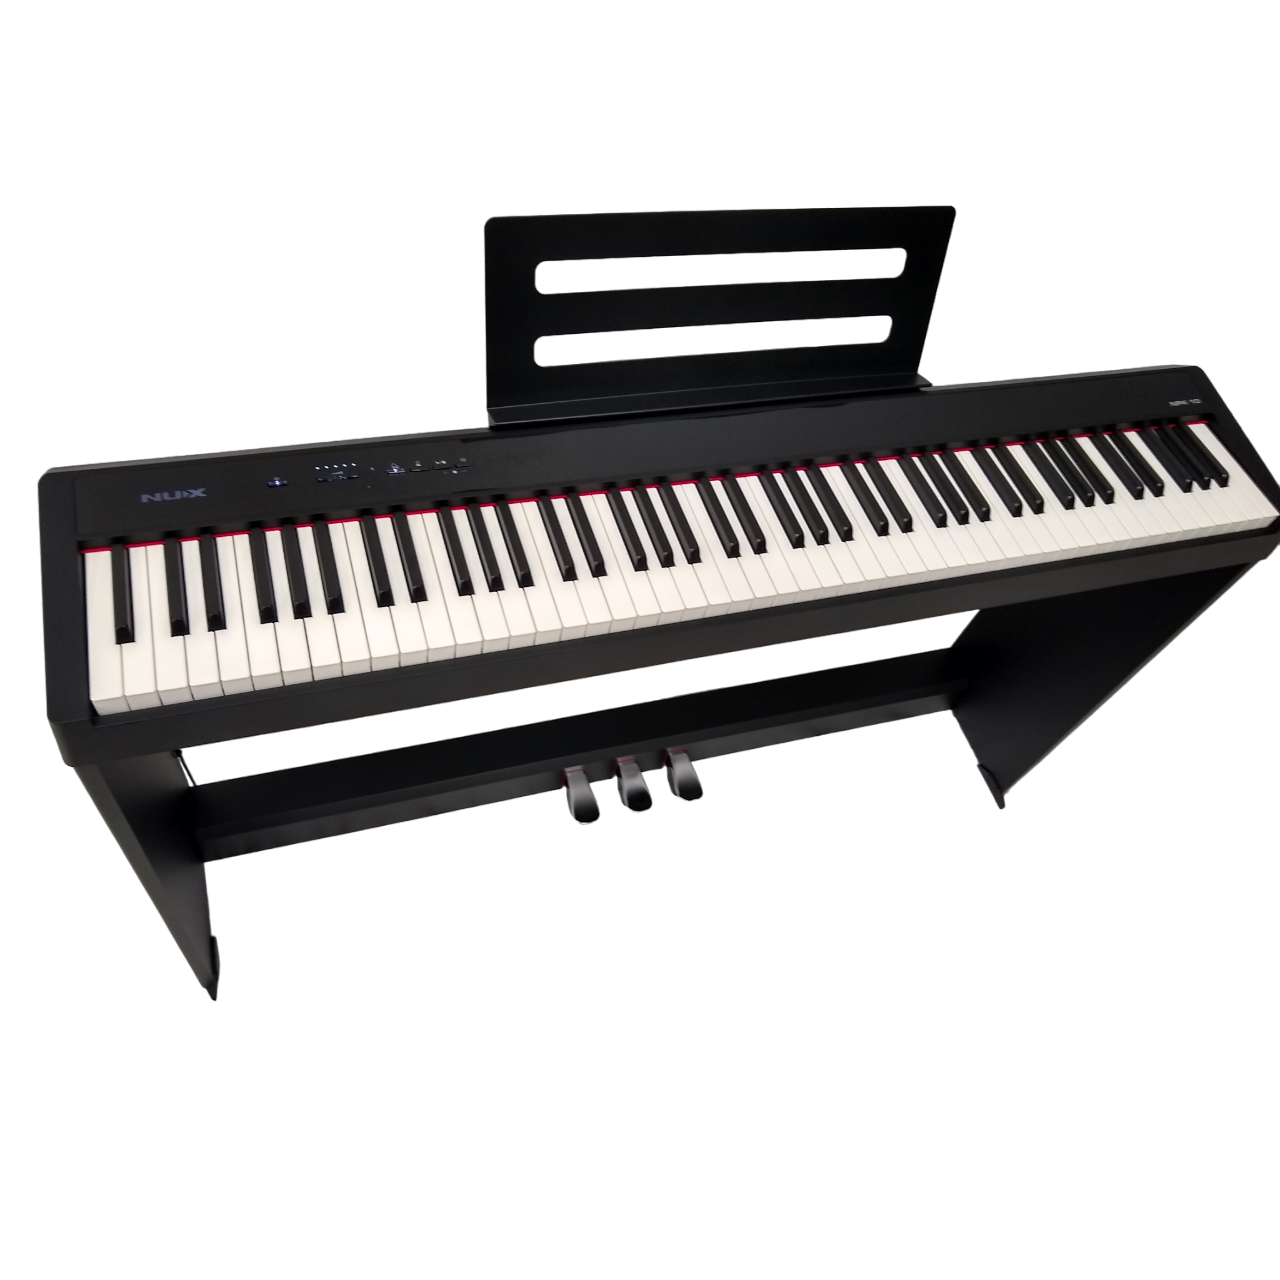 Nux Professional Digital Piano Nu-10 Stealth Black W/Stand